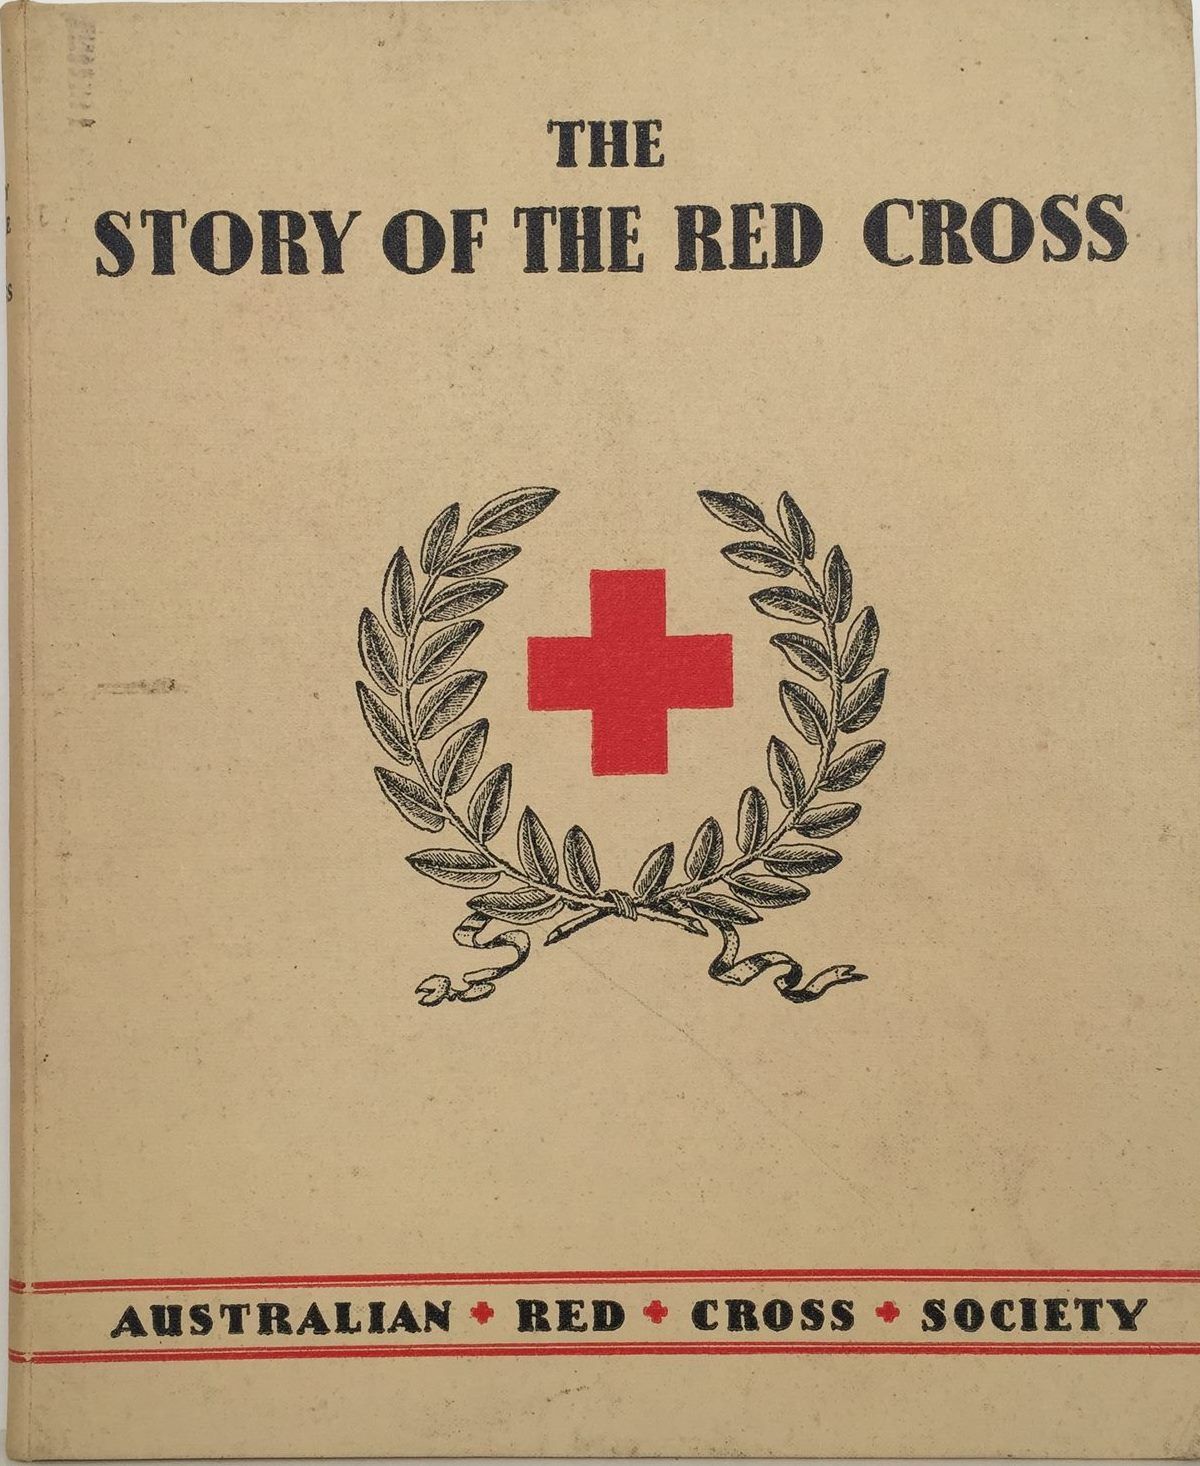 THE STORY OF THE RED CROSS: Australian Red Cross Society